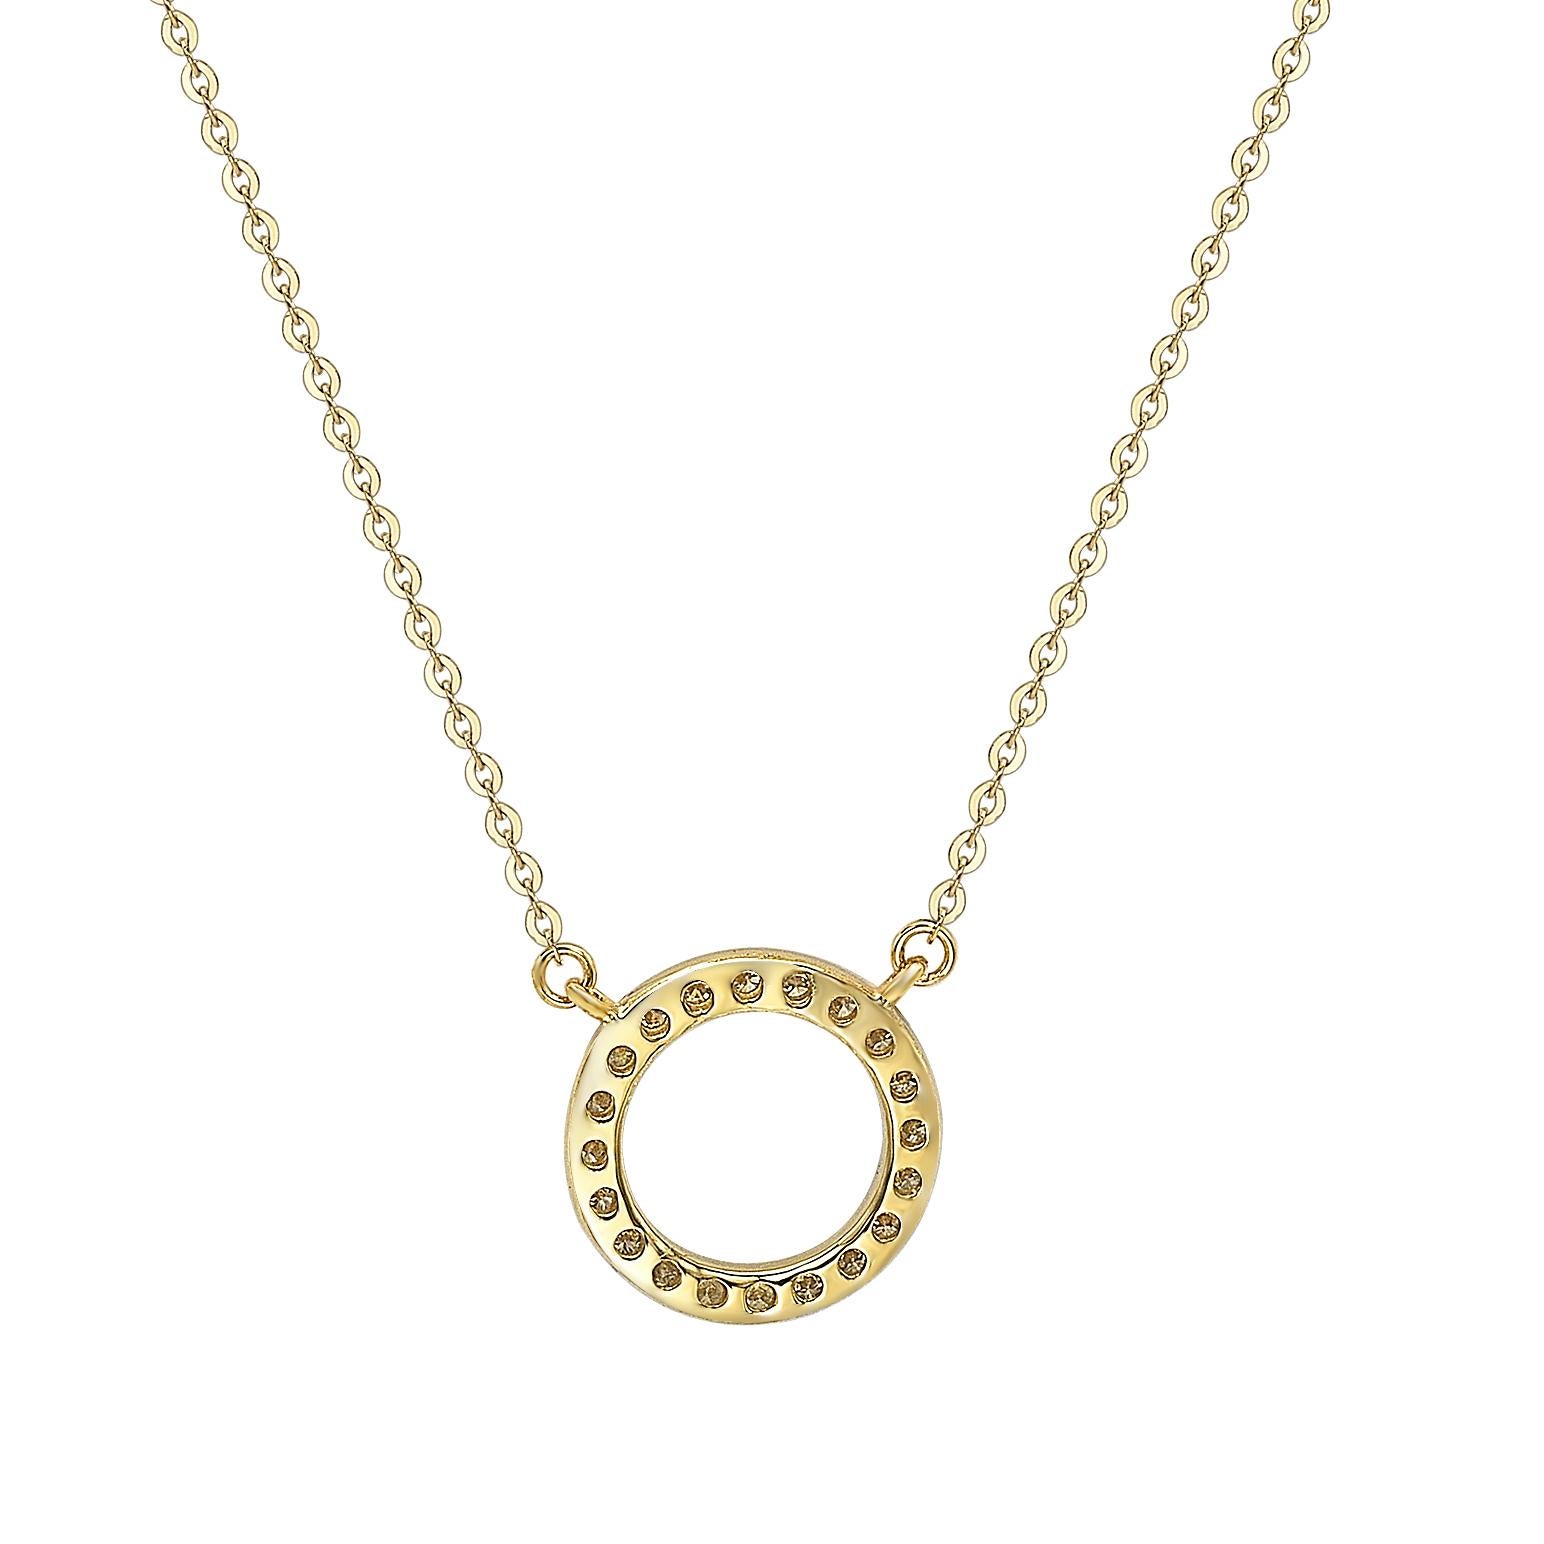 This breathtaking Suzy Levian circle necklace features natural diamonds, hand-set in 14-Karat yellow gold. It's the perfect gift to let someone special know you're thinking of them. Each circle necklace features a single row of pave natural white